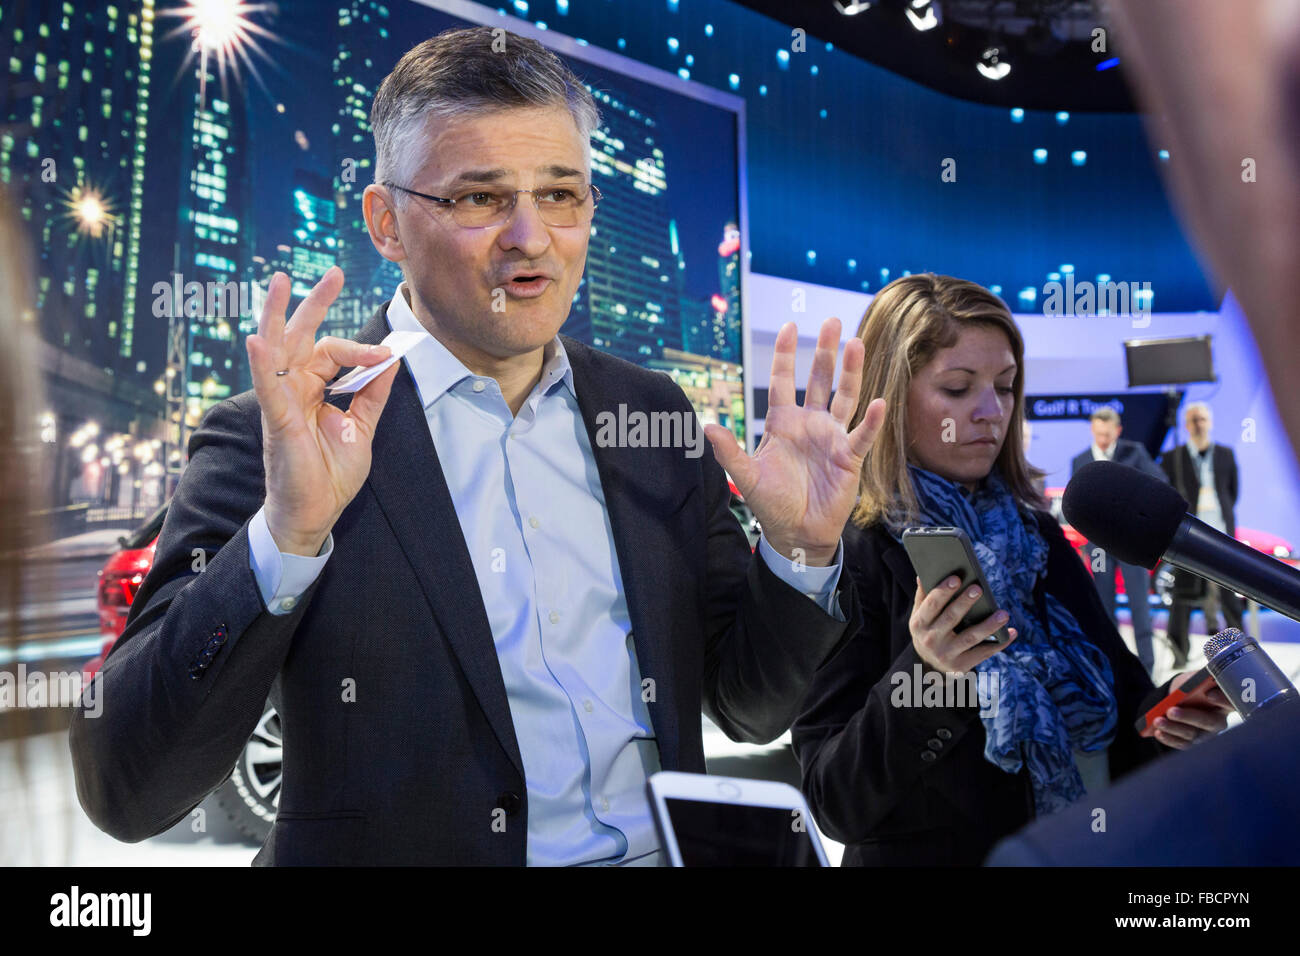 Detroit, Michigan - Michael Horn, president and CEO of Volkswagen Group of America, speaks to reporters at the Detroit auto show Stock Photo